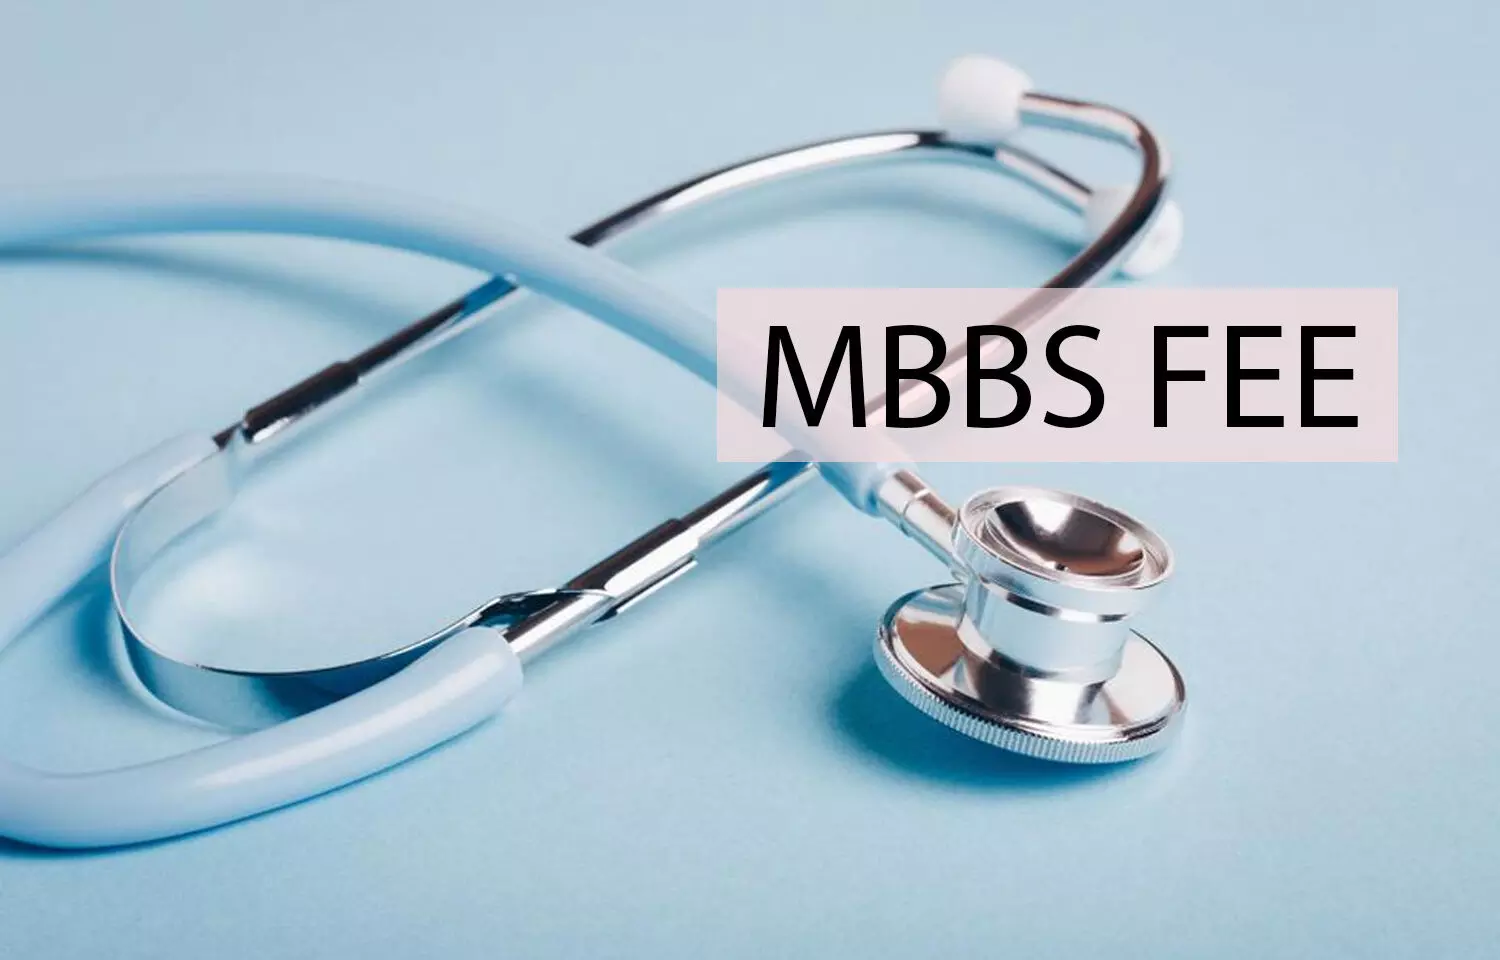 MBBS Admissions 2020: MP DME releases revised fee structure, Details